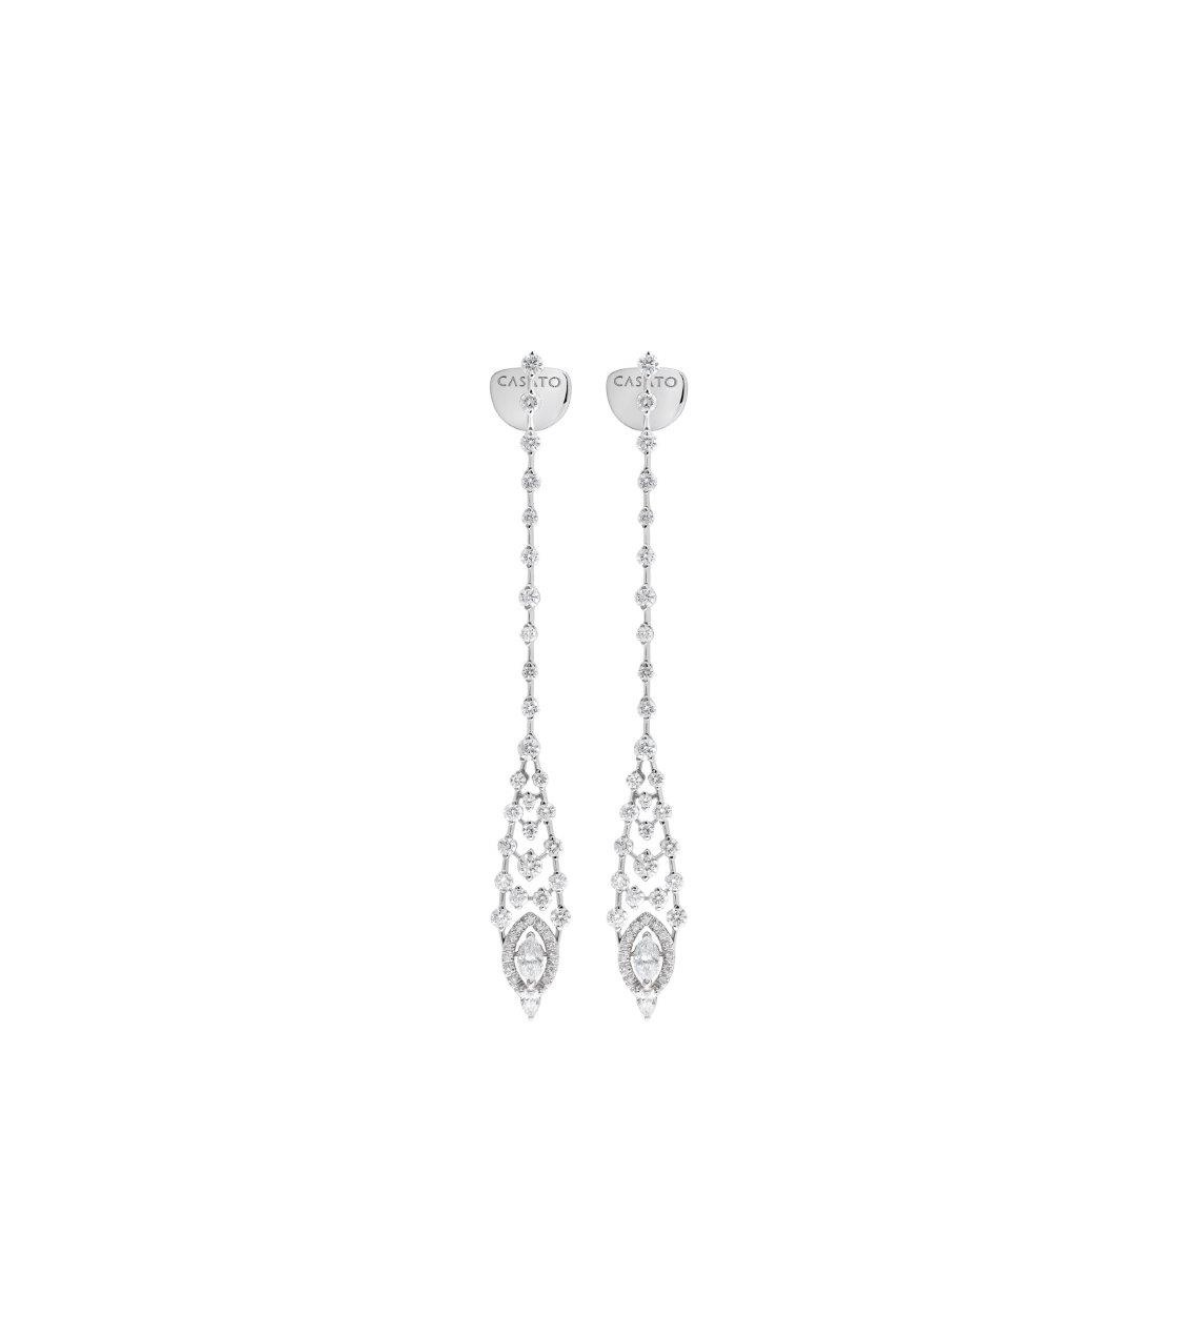 White Gold Earrings with Diamonds ORX1174BT-W by Casato